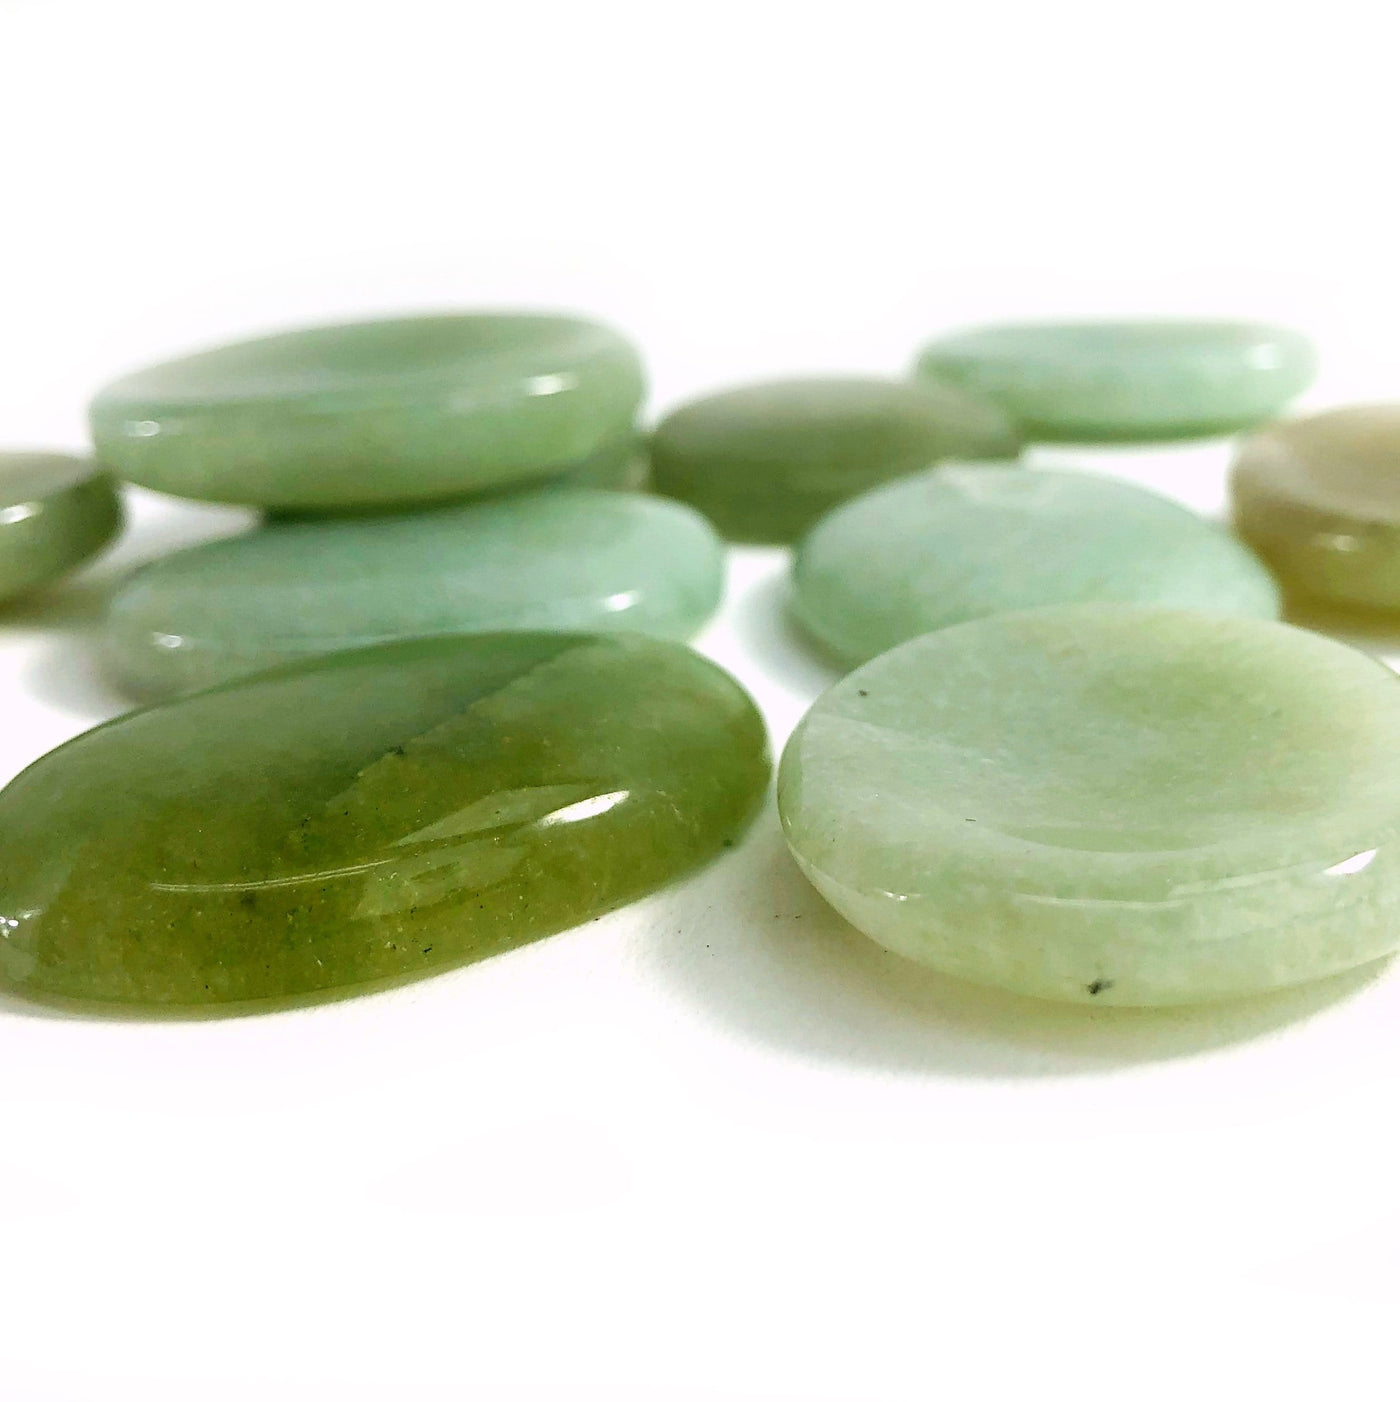 Green Aventurine Worry Stone spread out and view from side view